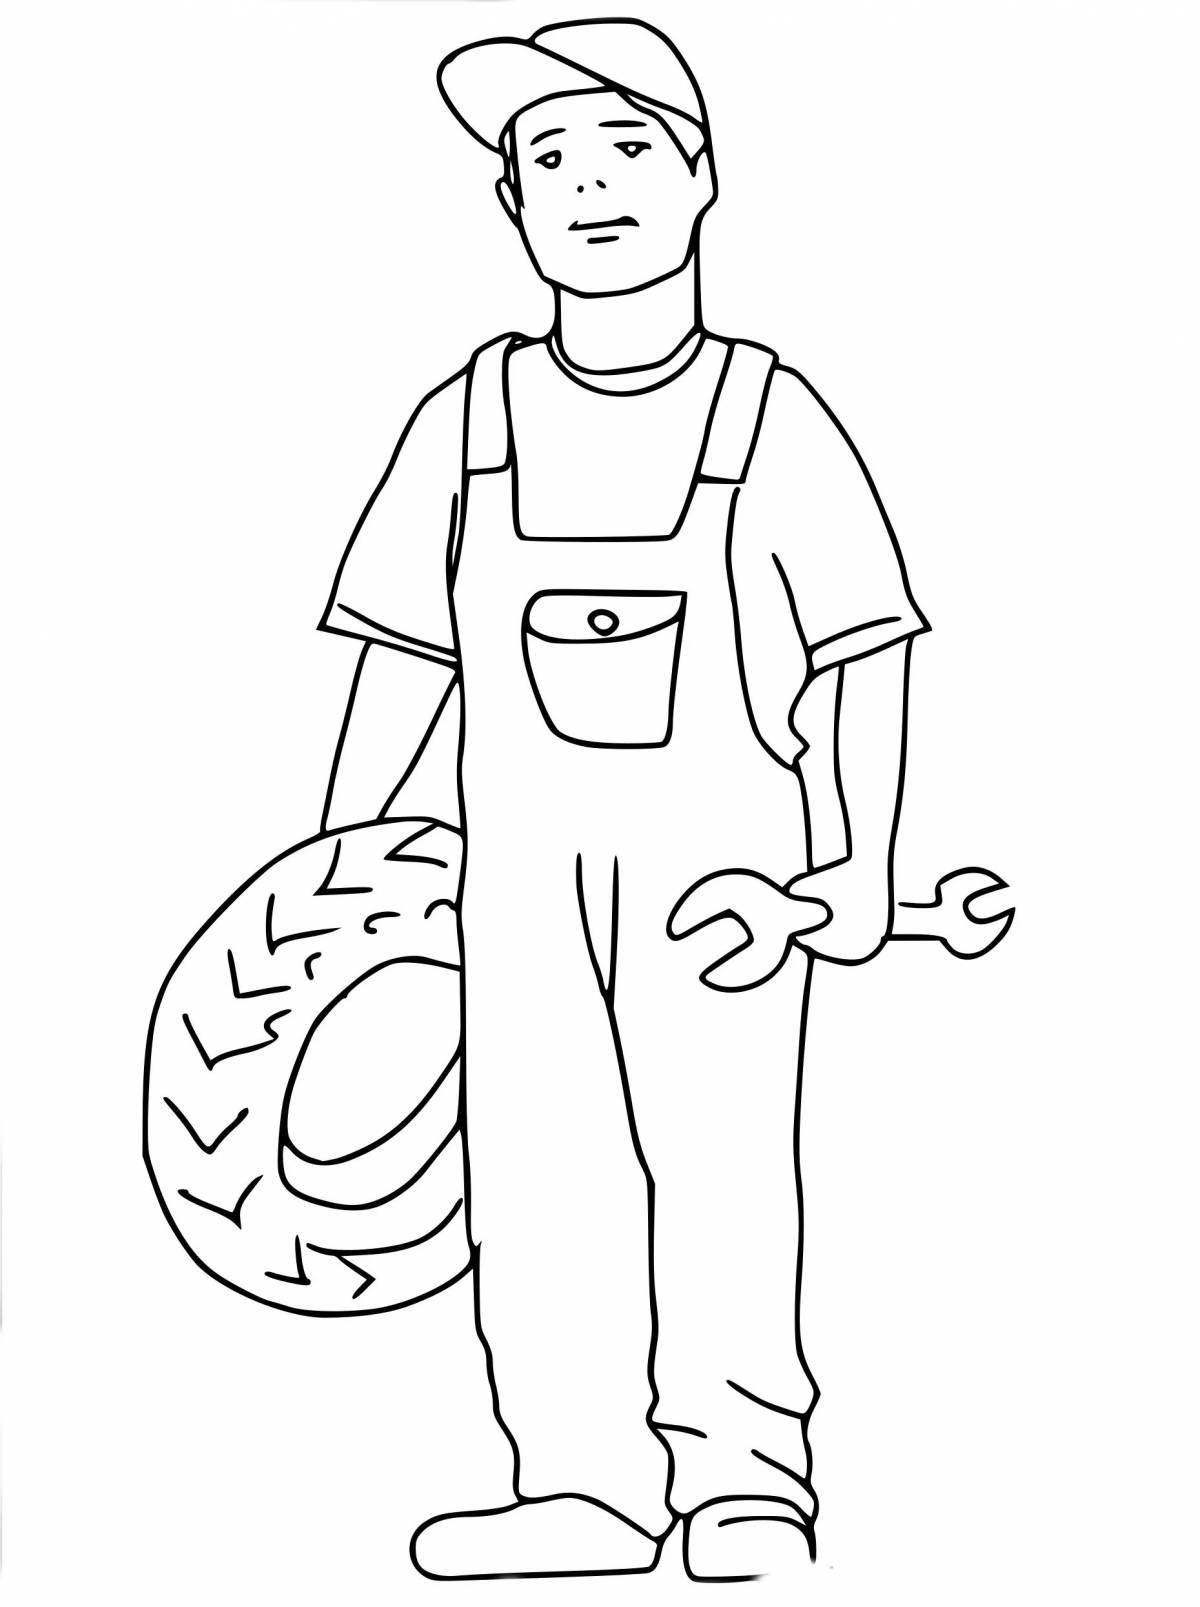 Amazing car mechanic coloring page